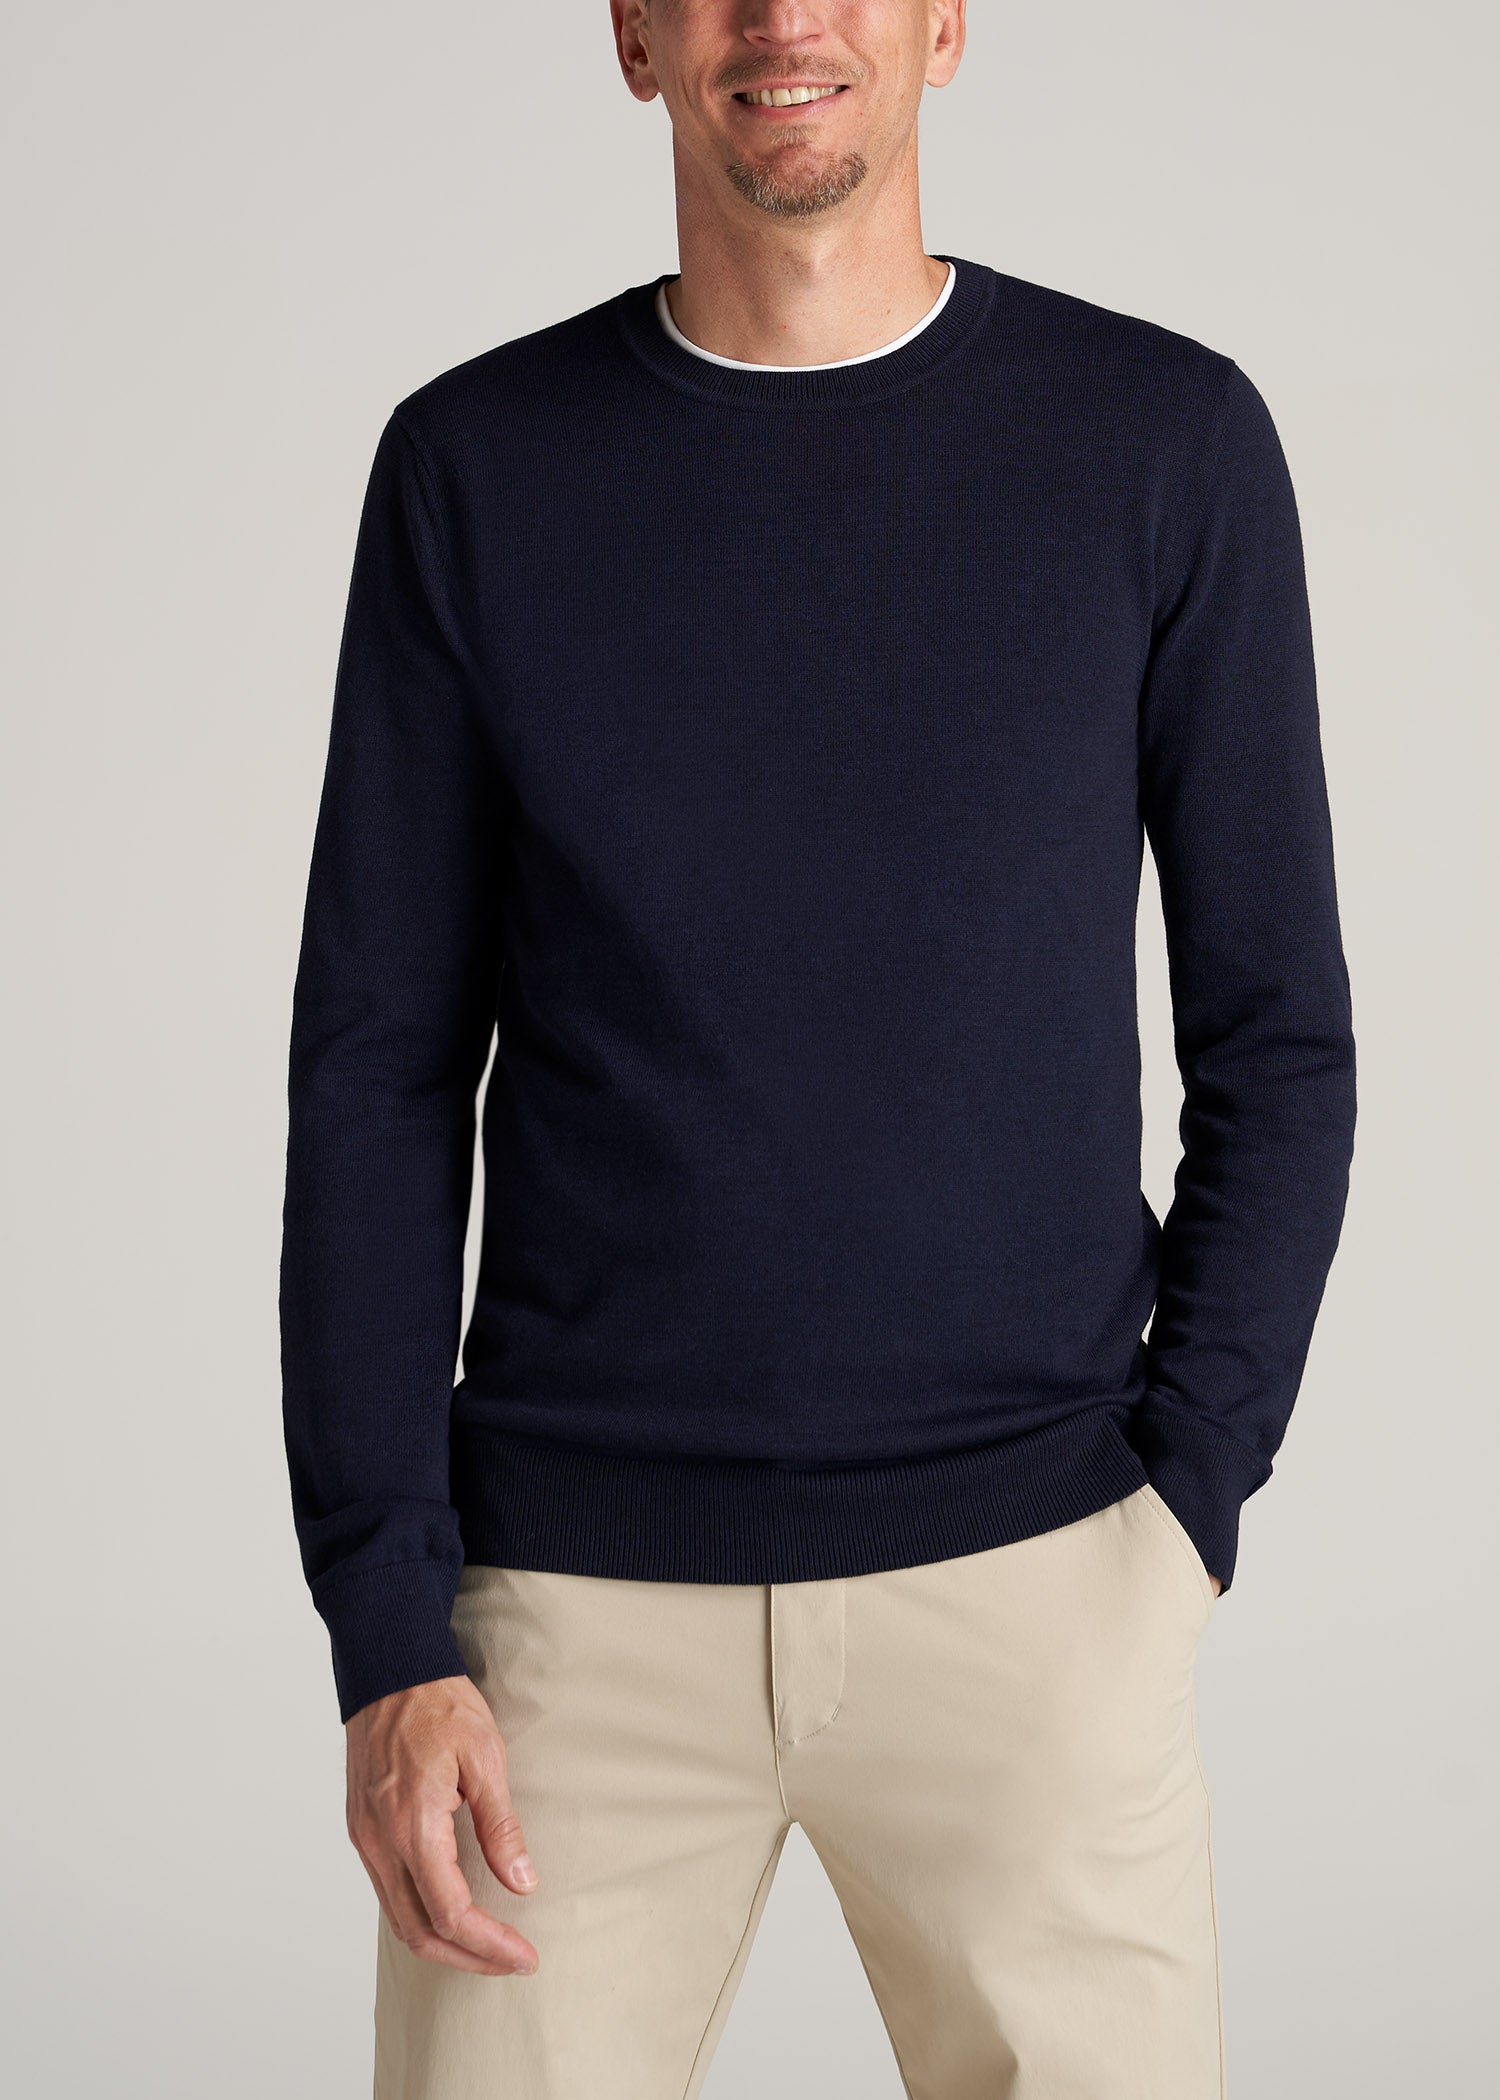 Tall guy wearing American Tall's Everyday Crewneck Sweater in the color Patriot Blue.